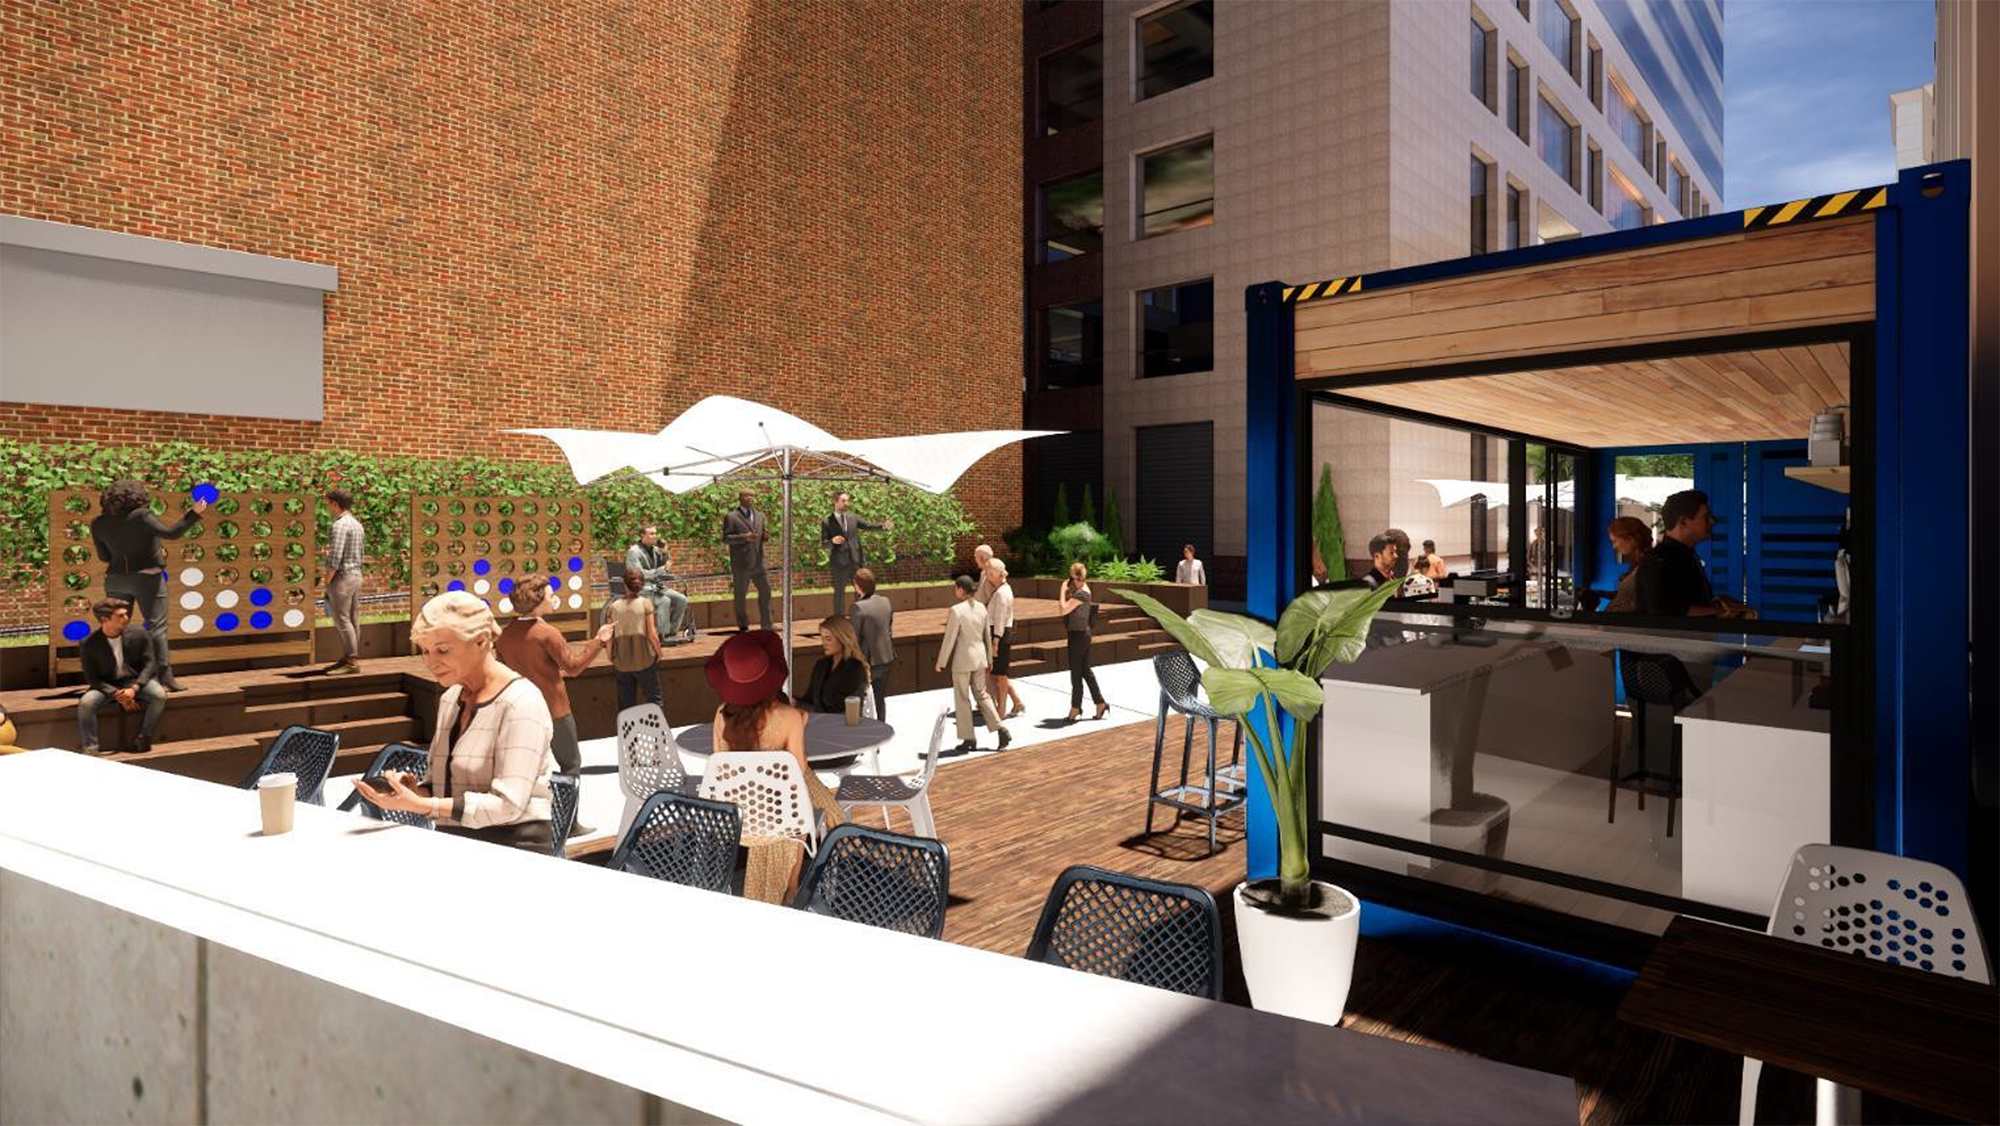 The breezeway will offer seating for The Bread & Board restaurant under construction at 100 W. Bay St.